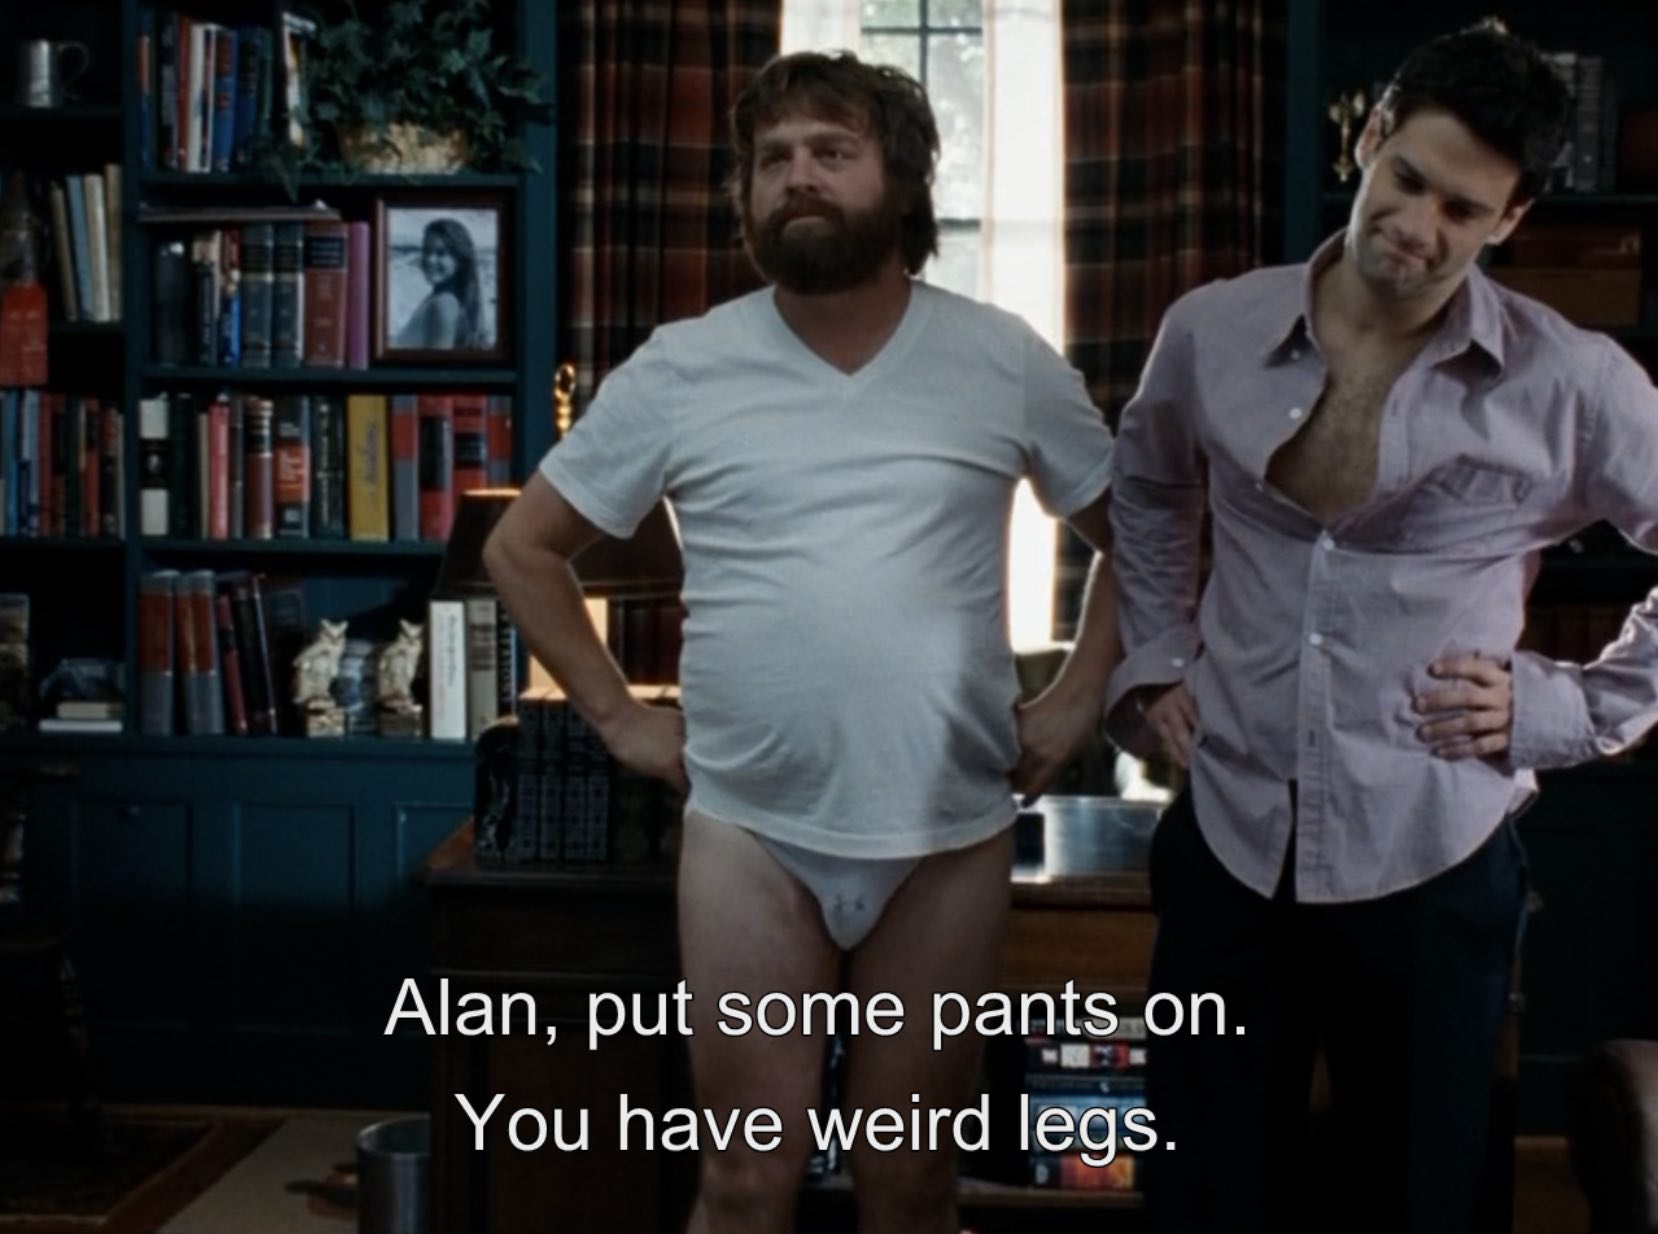 Alan from the Hangover has freaky and weird legs